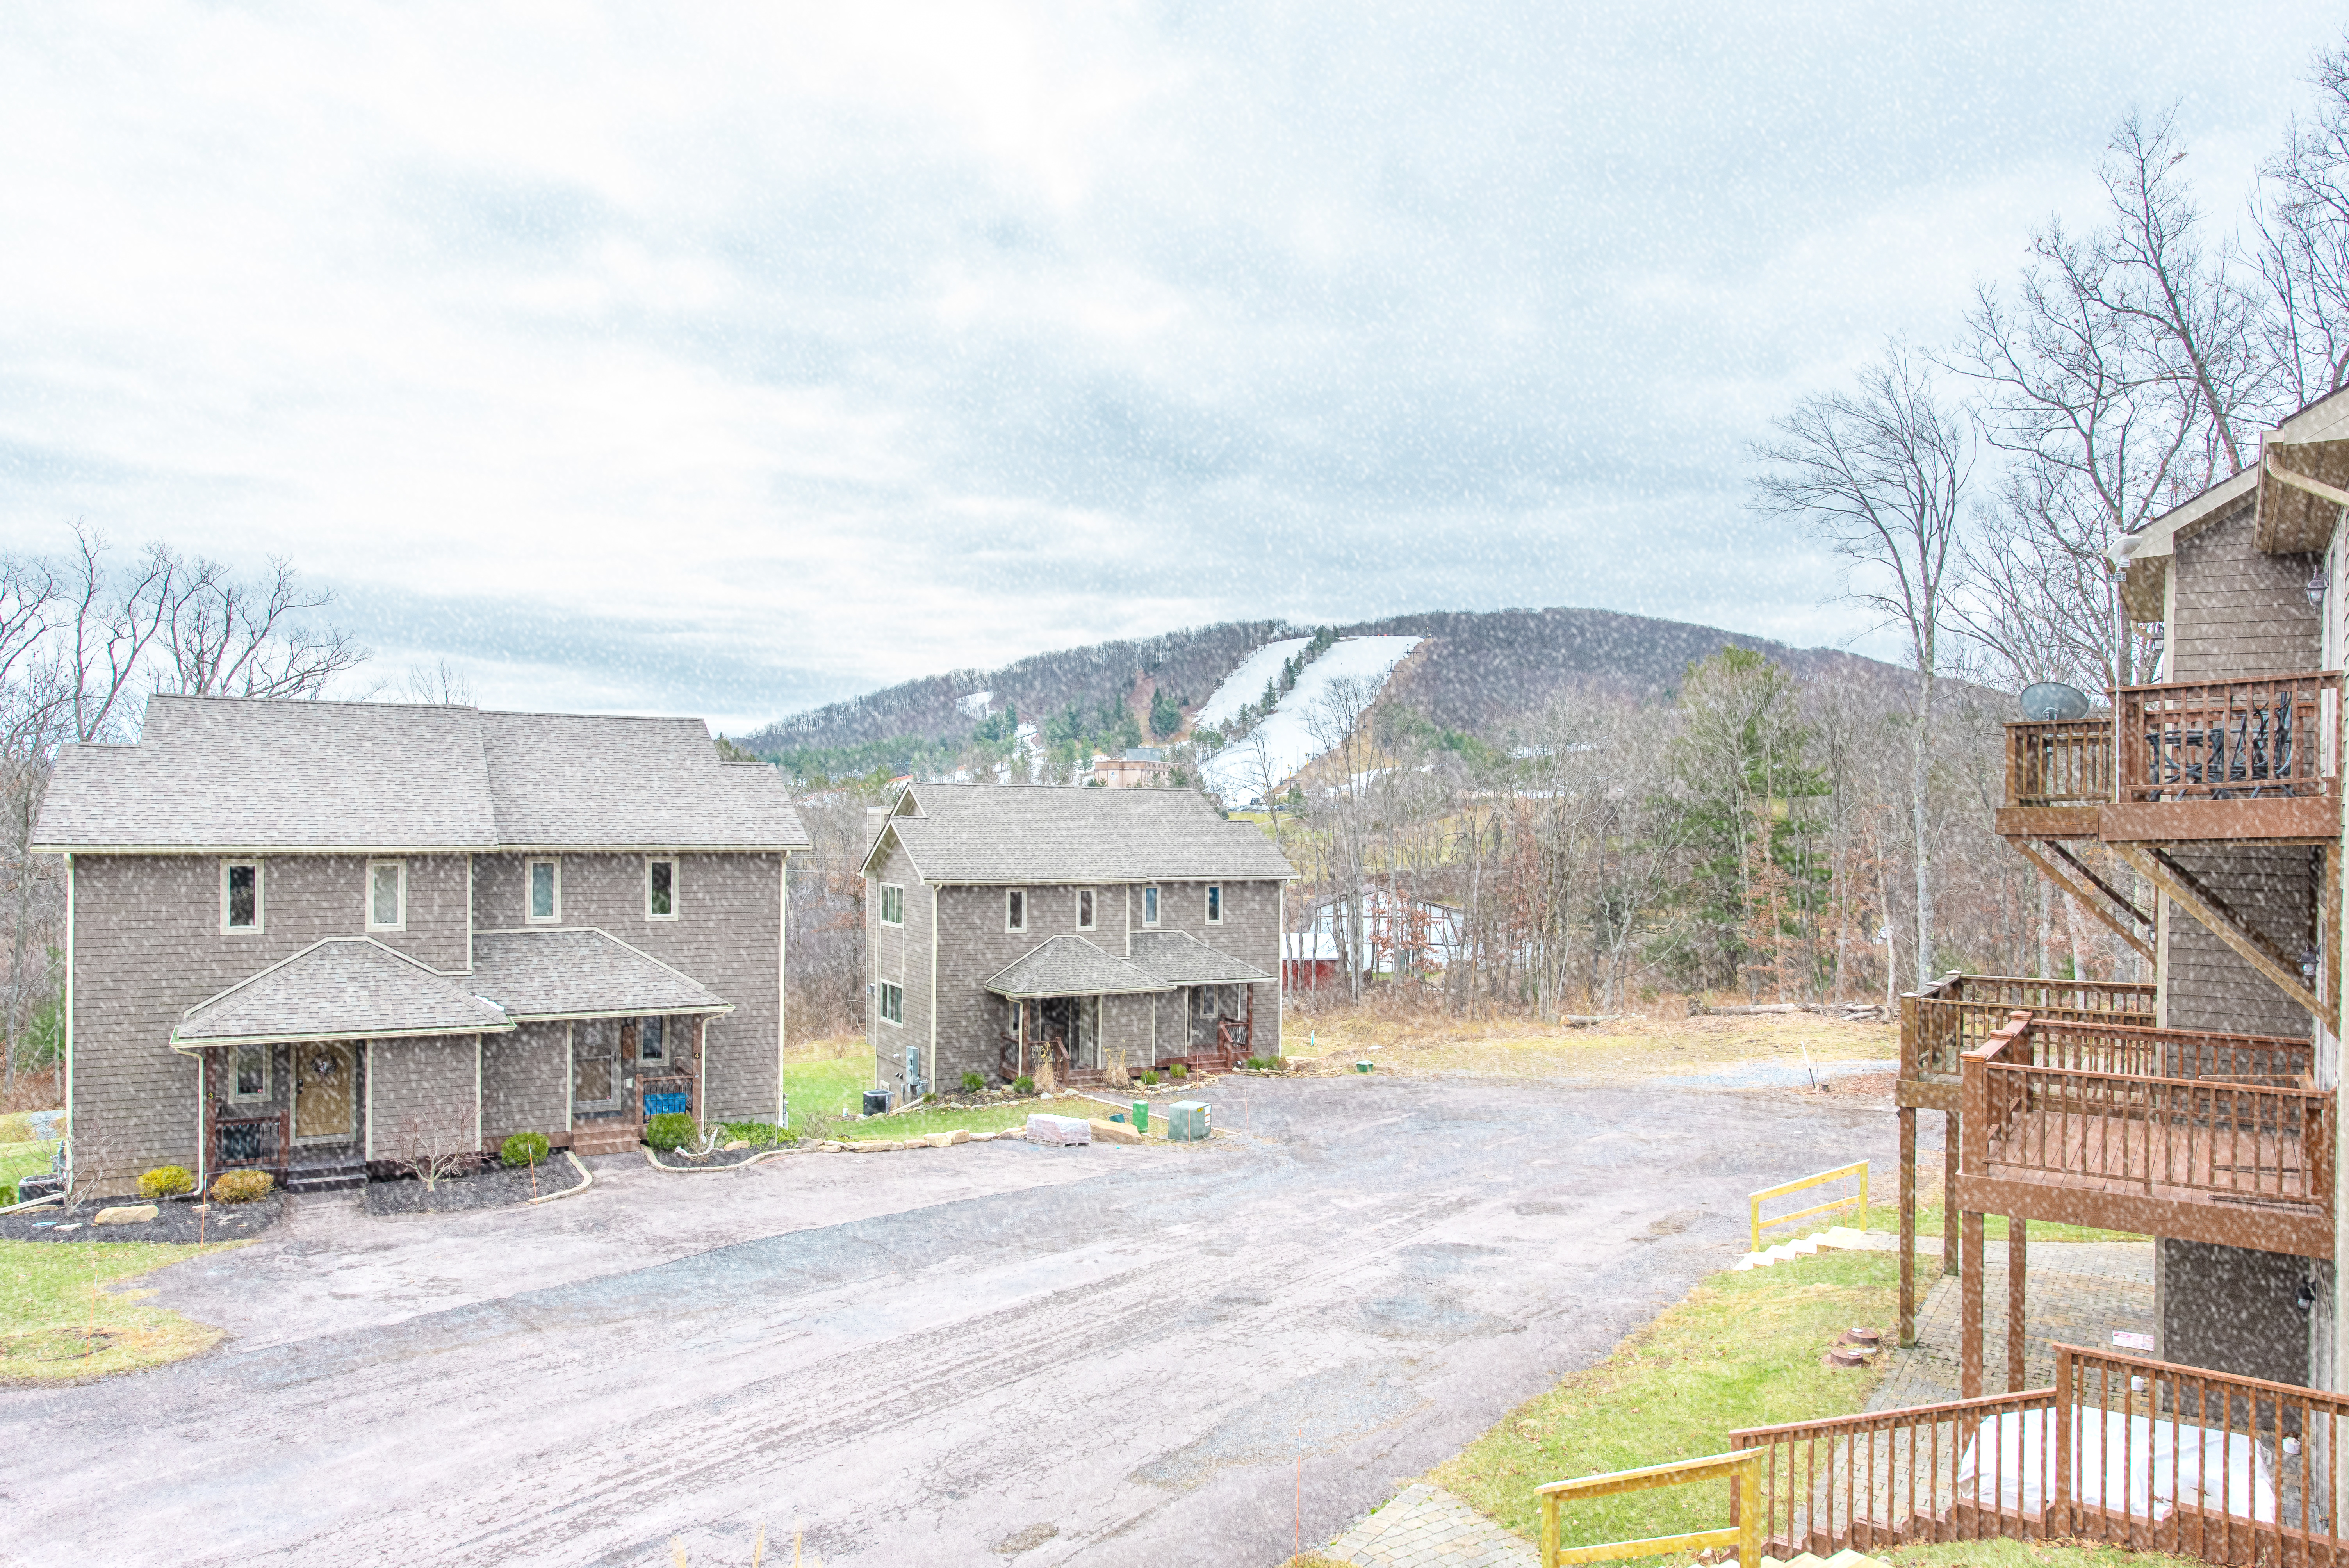 View of Wisp Ski Resort slopes from this community.